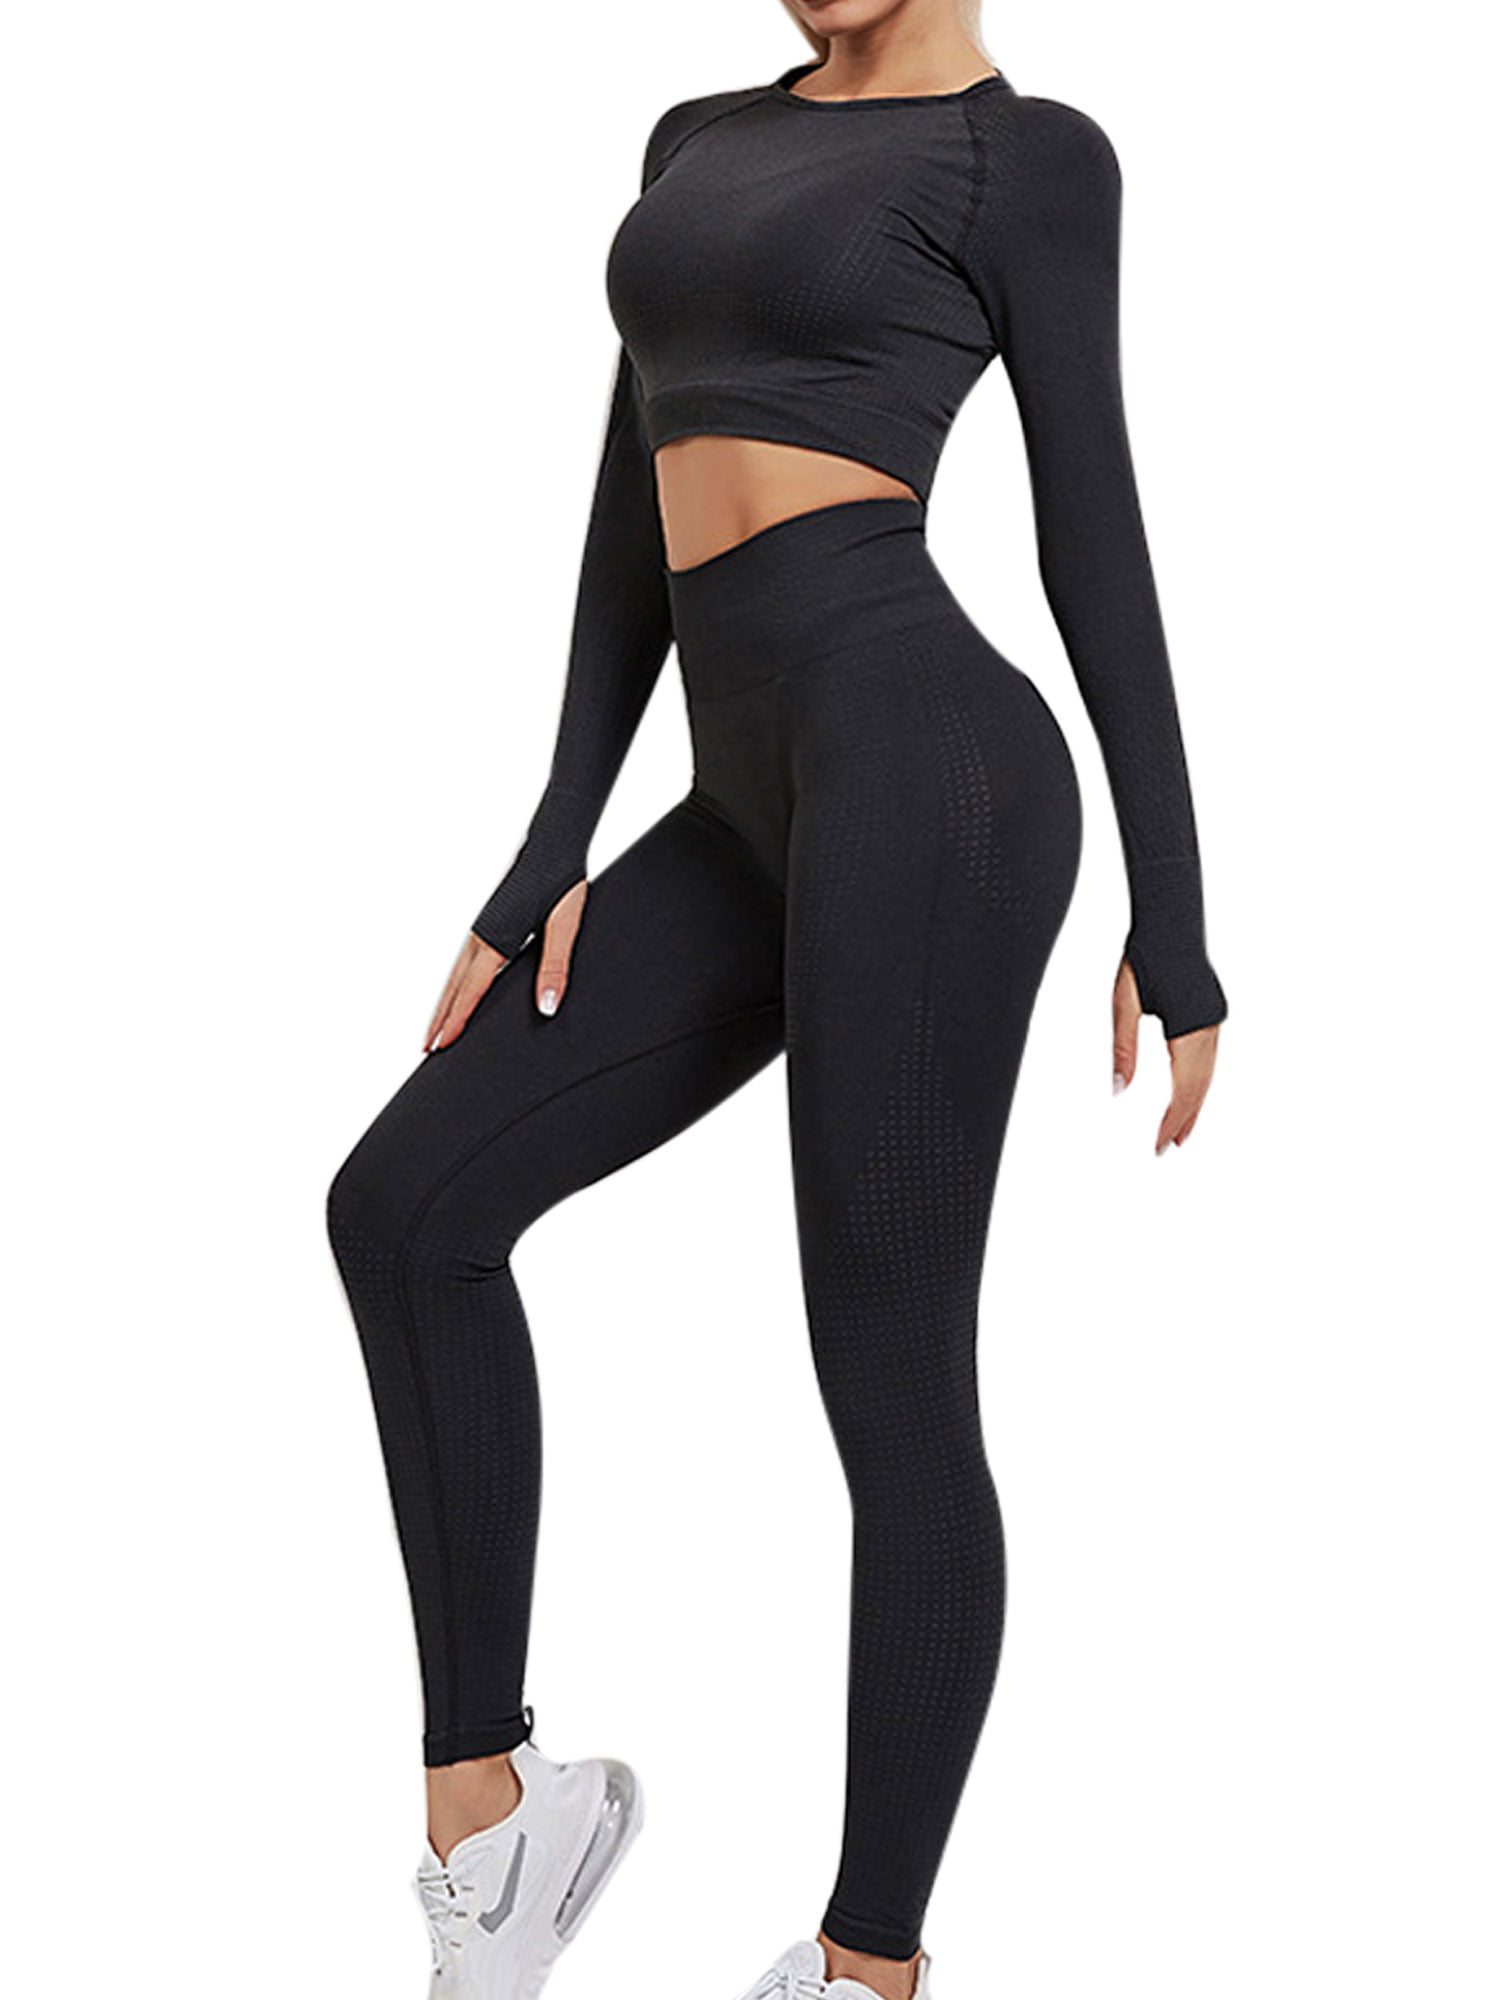 Gym Set for Women 2 Piece Long Sleeve Workout Outfits Full Zip Cropped Top&Ribbed Leggings Set Running Yoga Clothes Suit